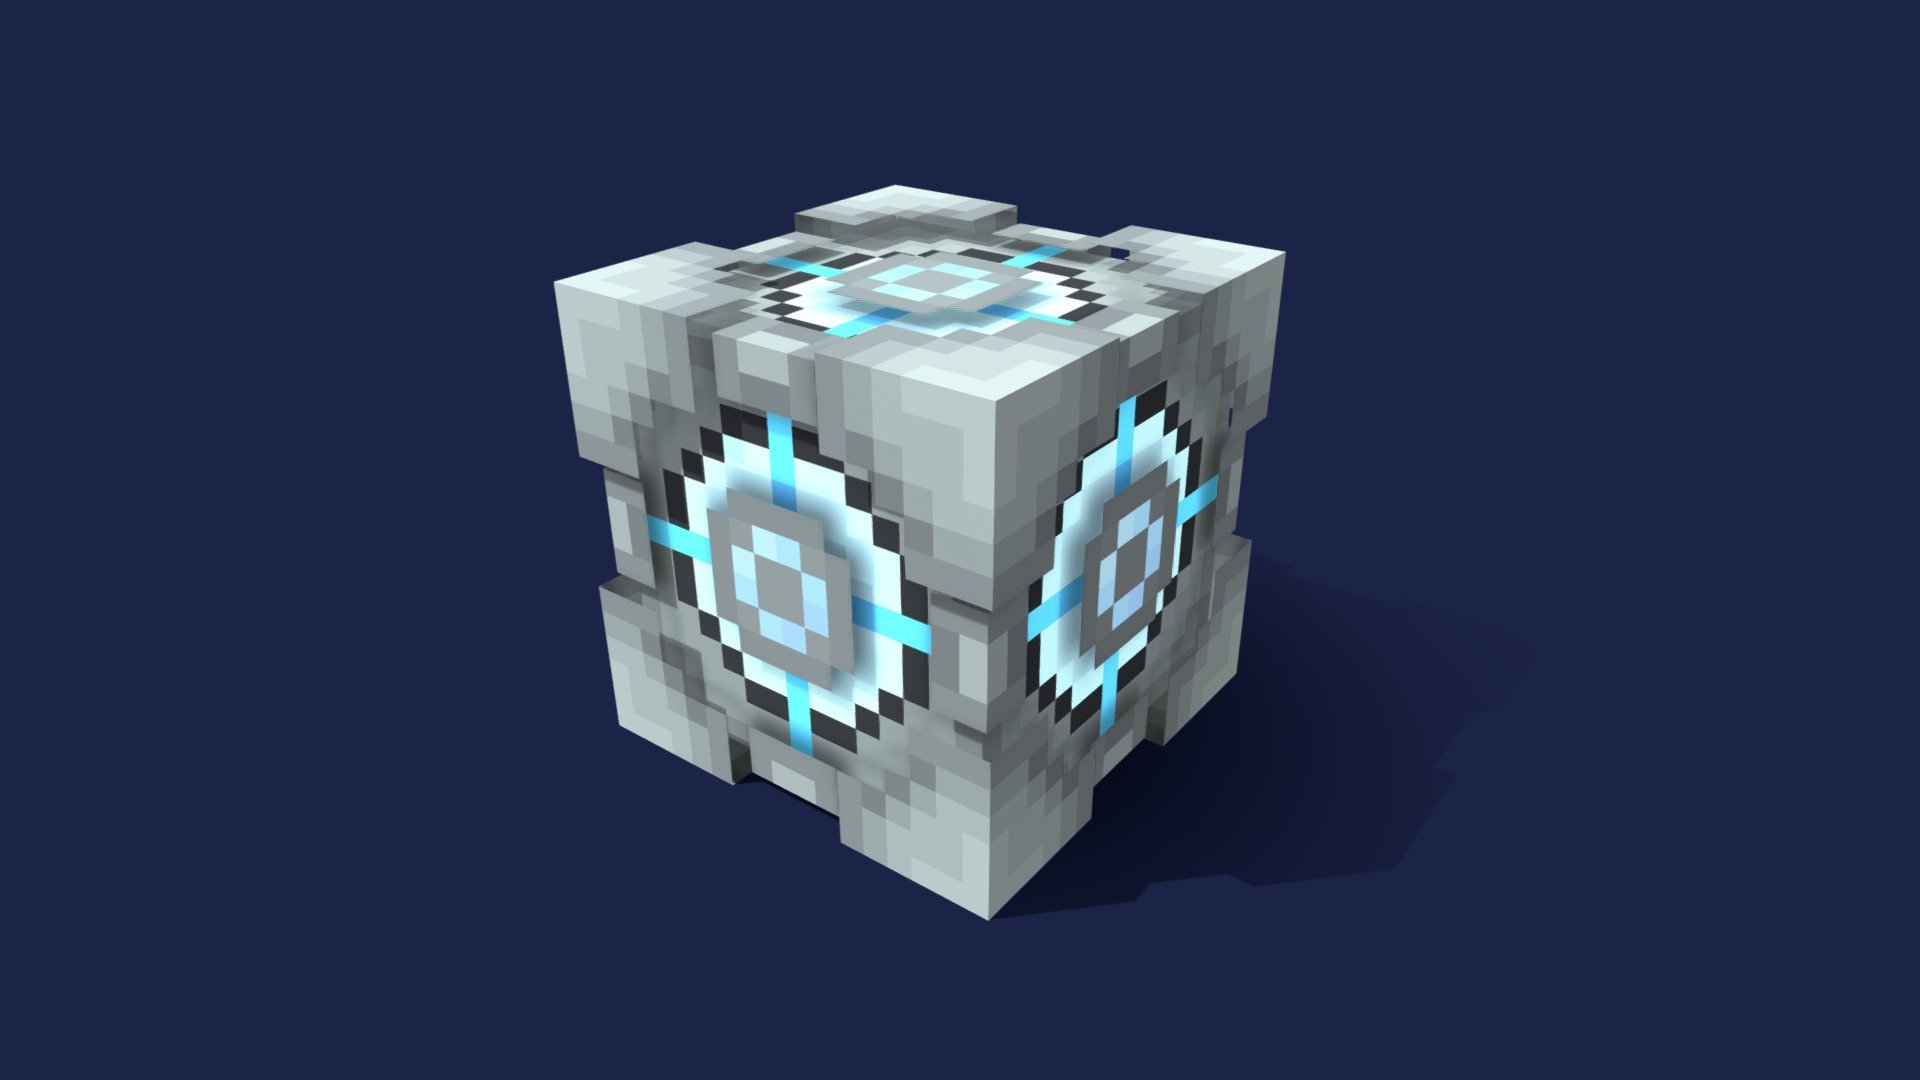 My Minecraft model of a Weighted Storage Cube from Portal 2 - Minecraft Weighted Storage Cube - 3D model by ewanhowell5195 3d model